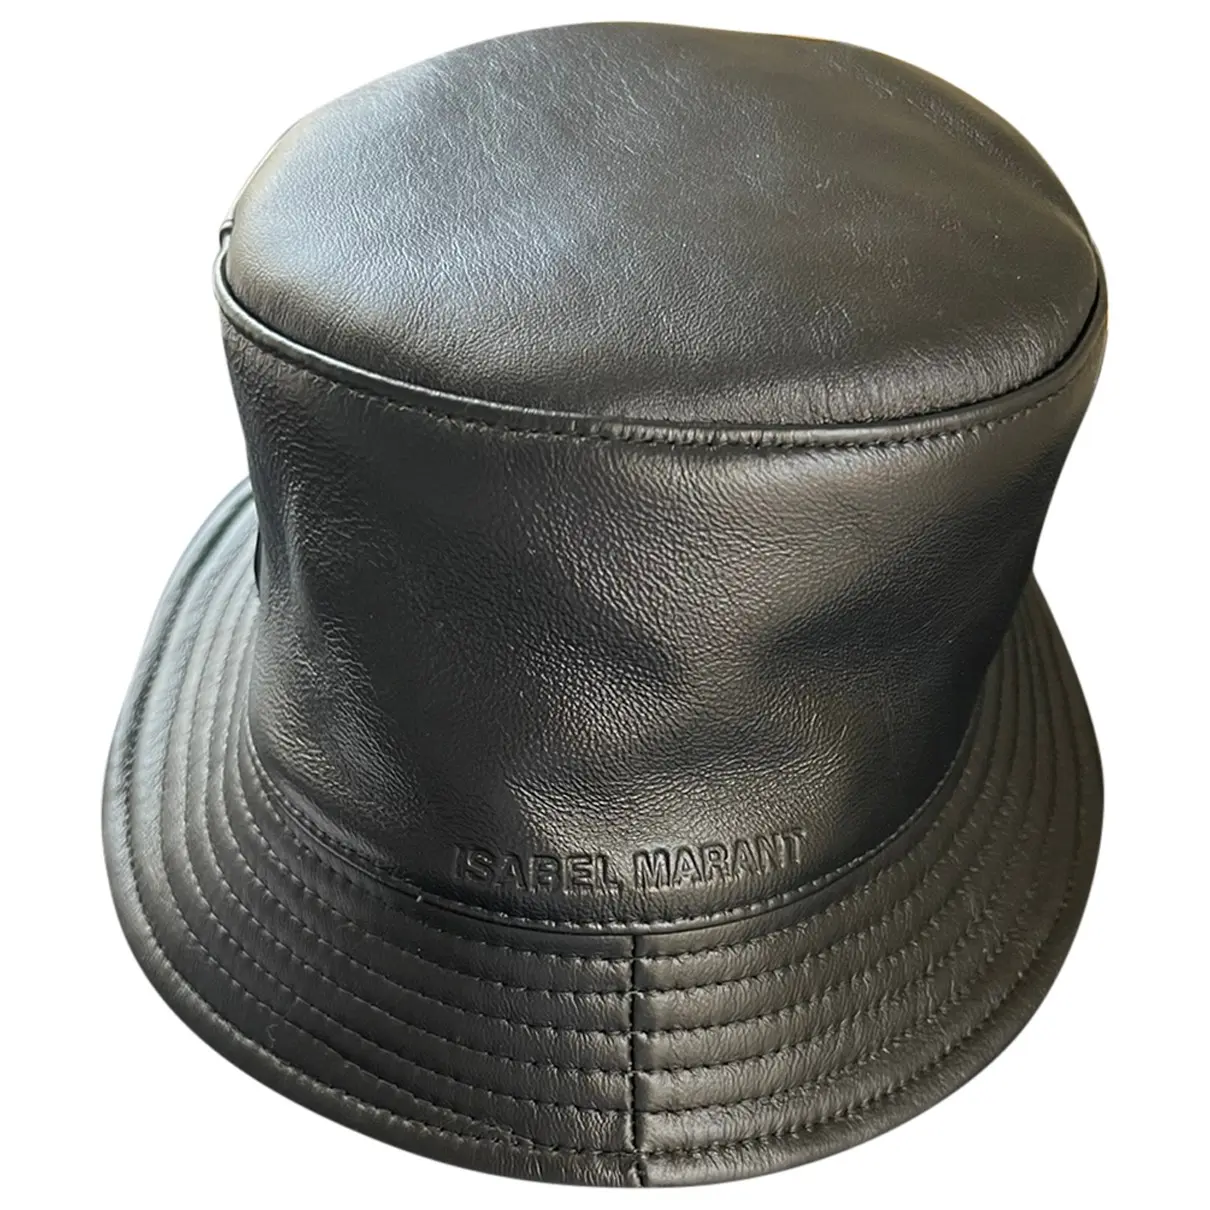 Leather hat